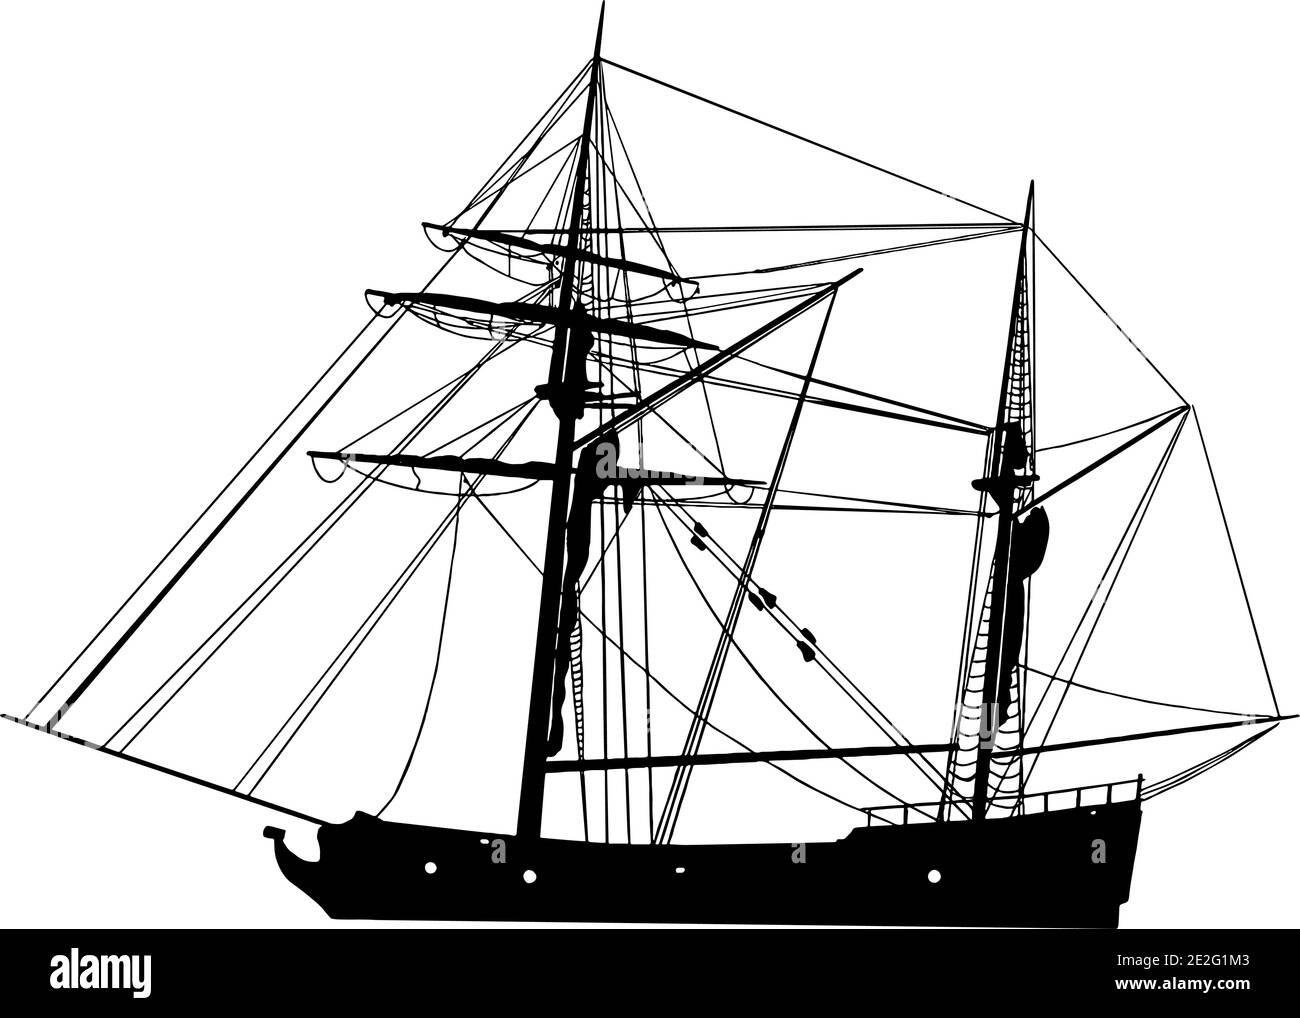 Sailing ship silhouette in black on white background vector graphic Stock Vector